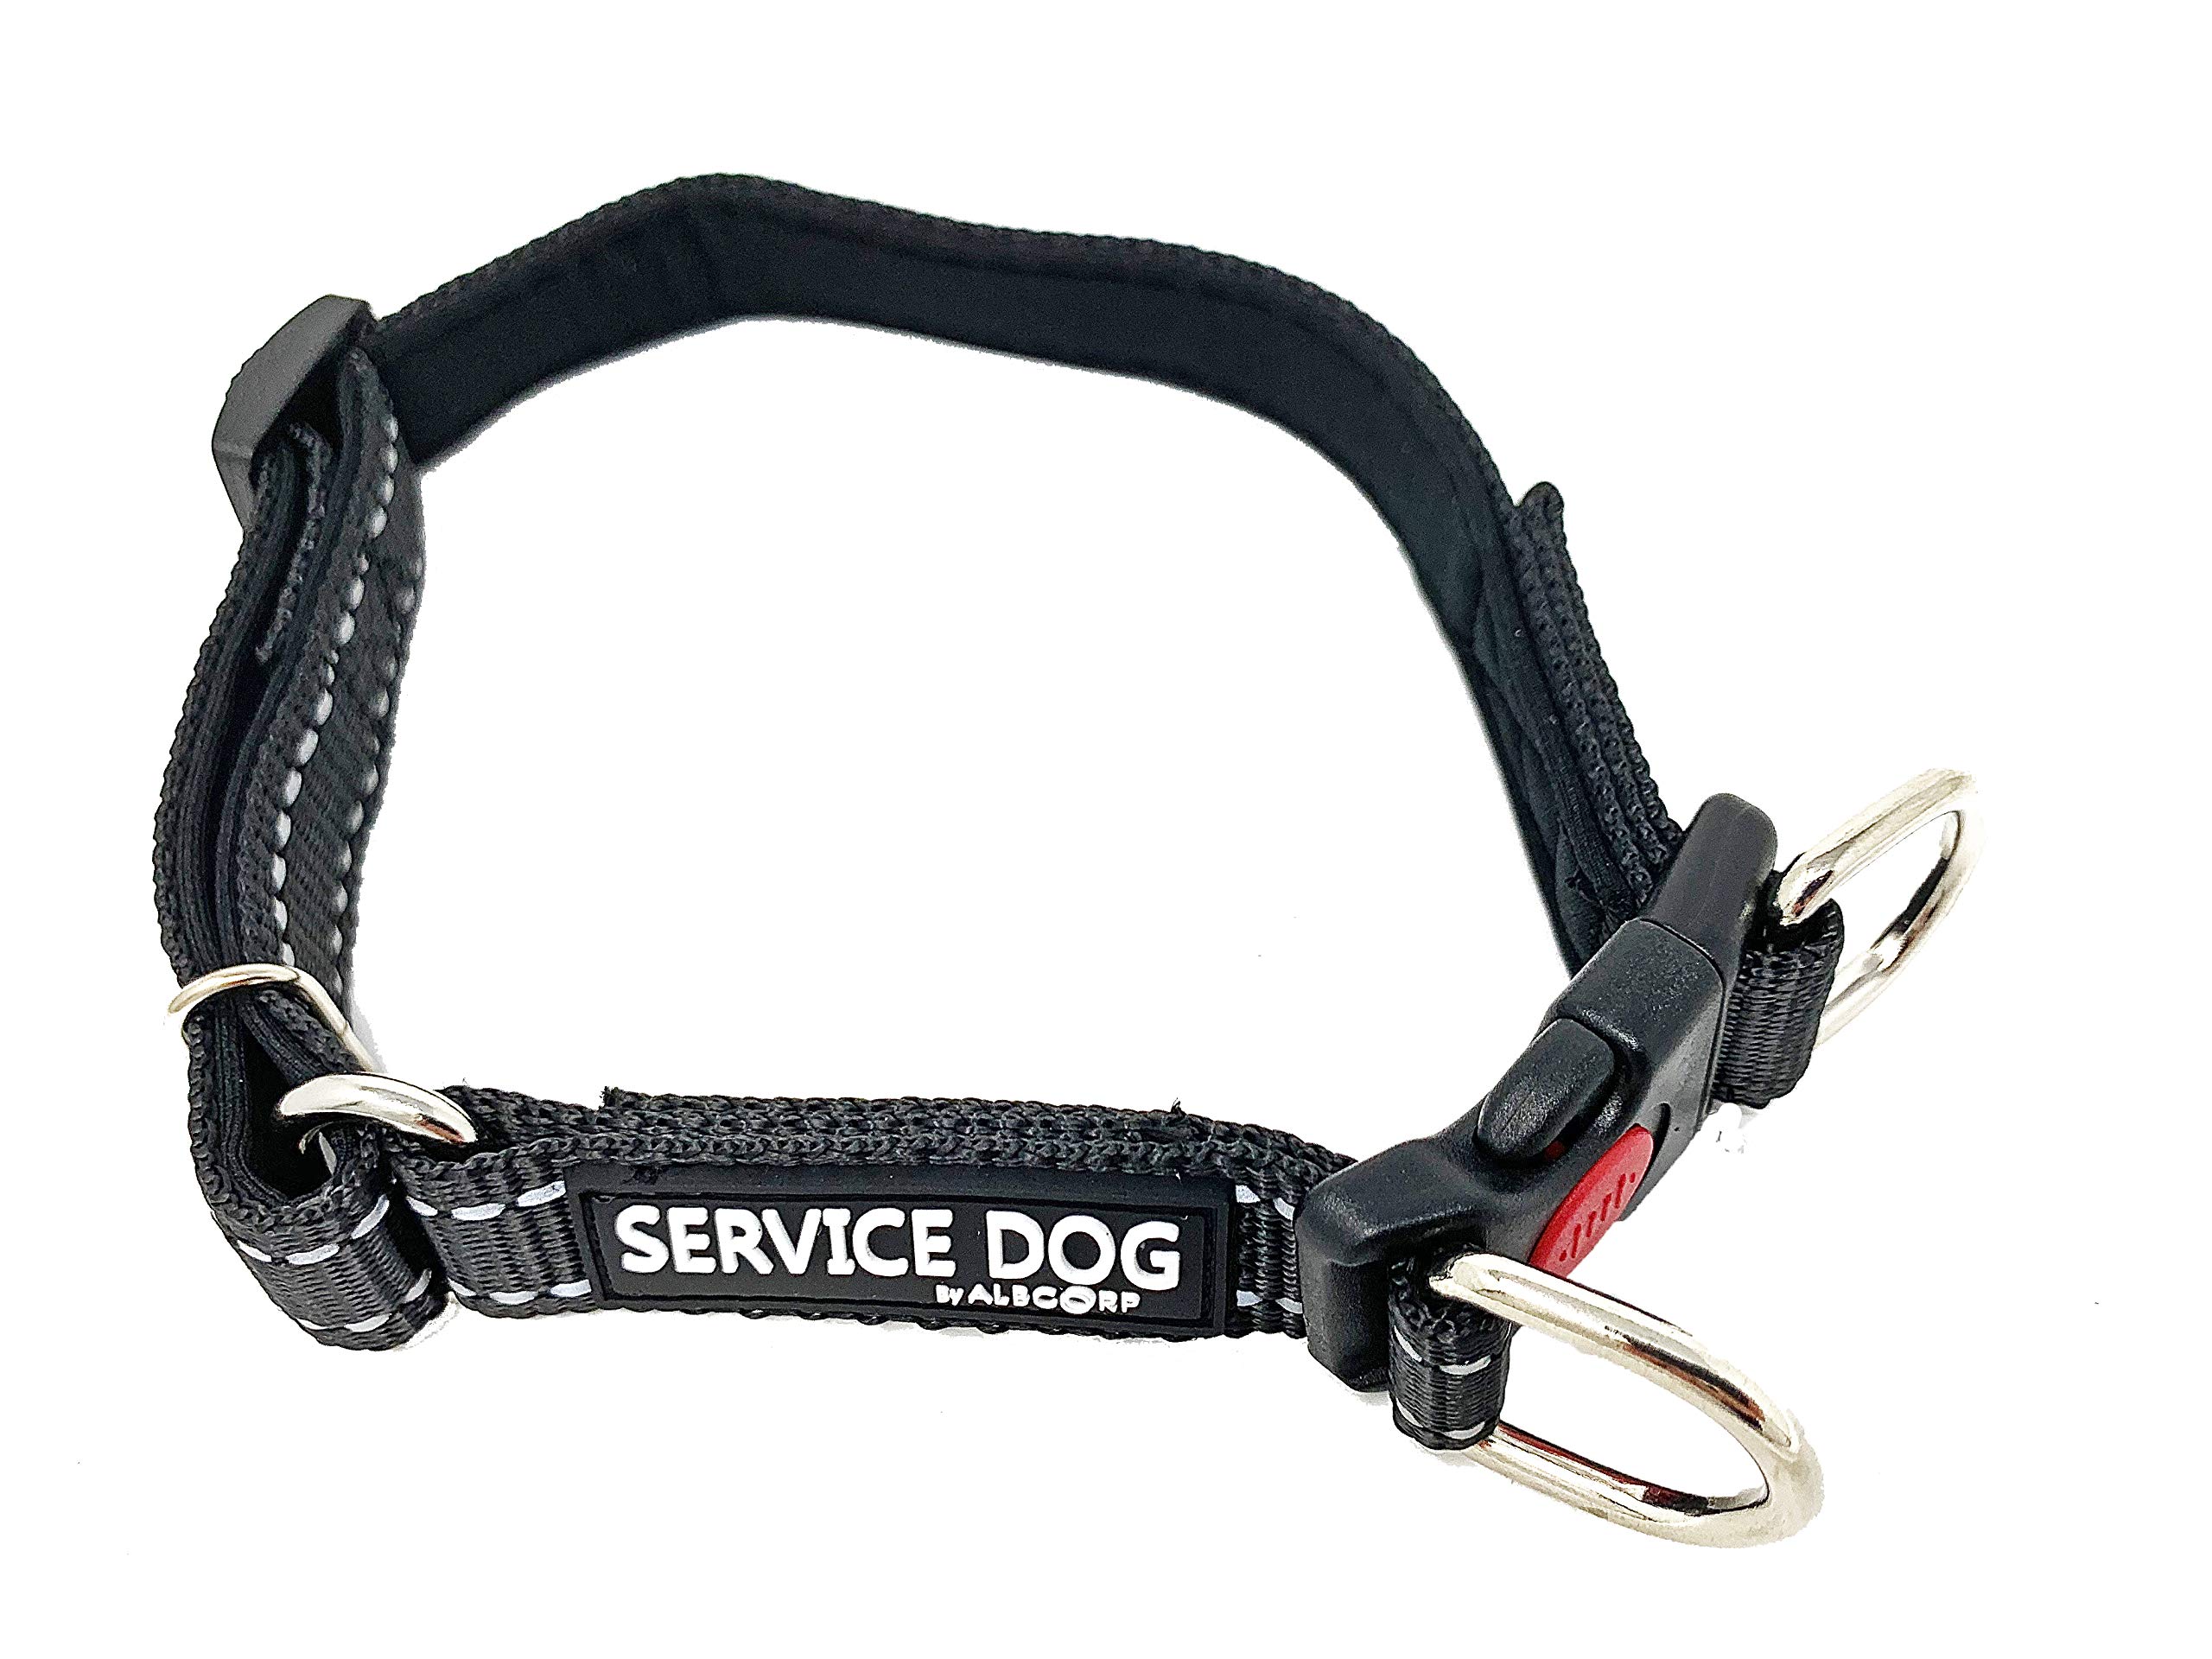 Albcorp Reflective Service Dog collar - Service Dog Rubber Patch - Durable D-Ring for Service Animal Leashes or ID Tags, Large, 